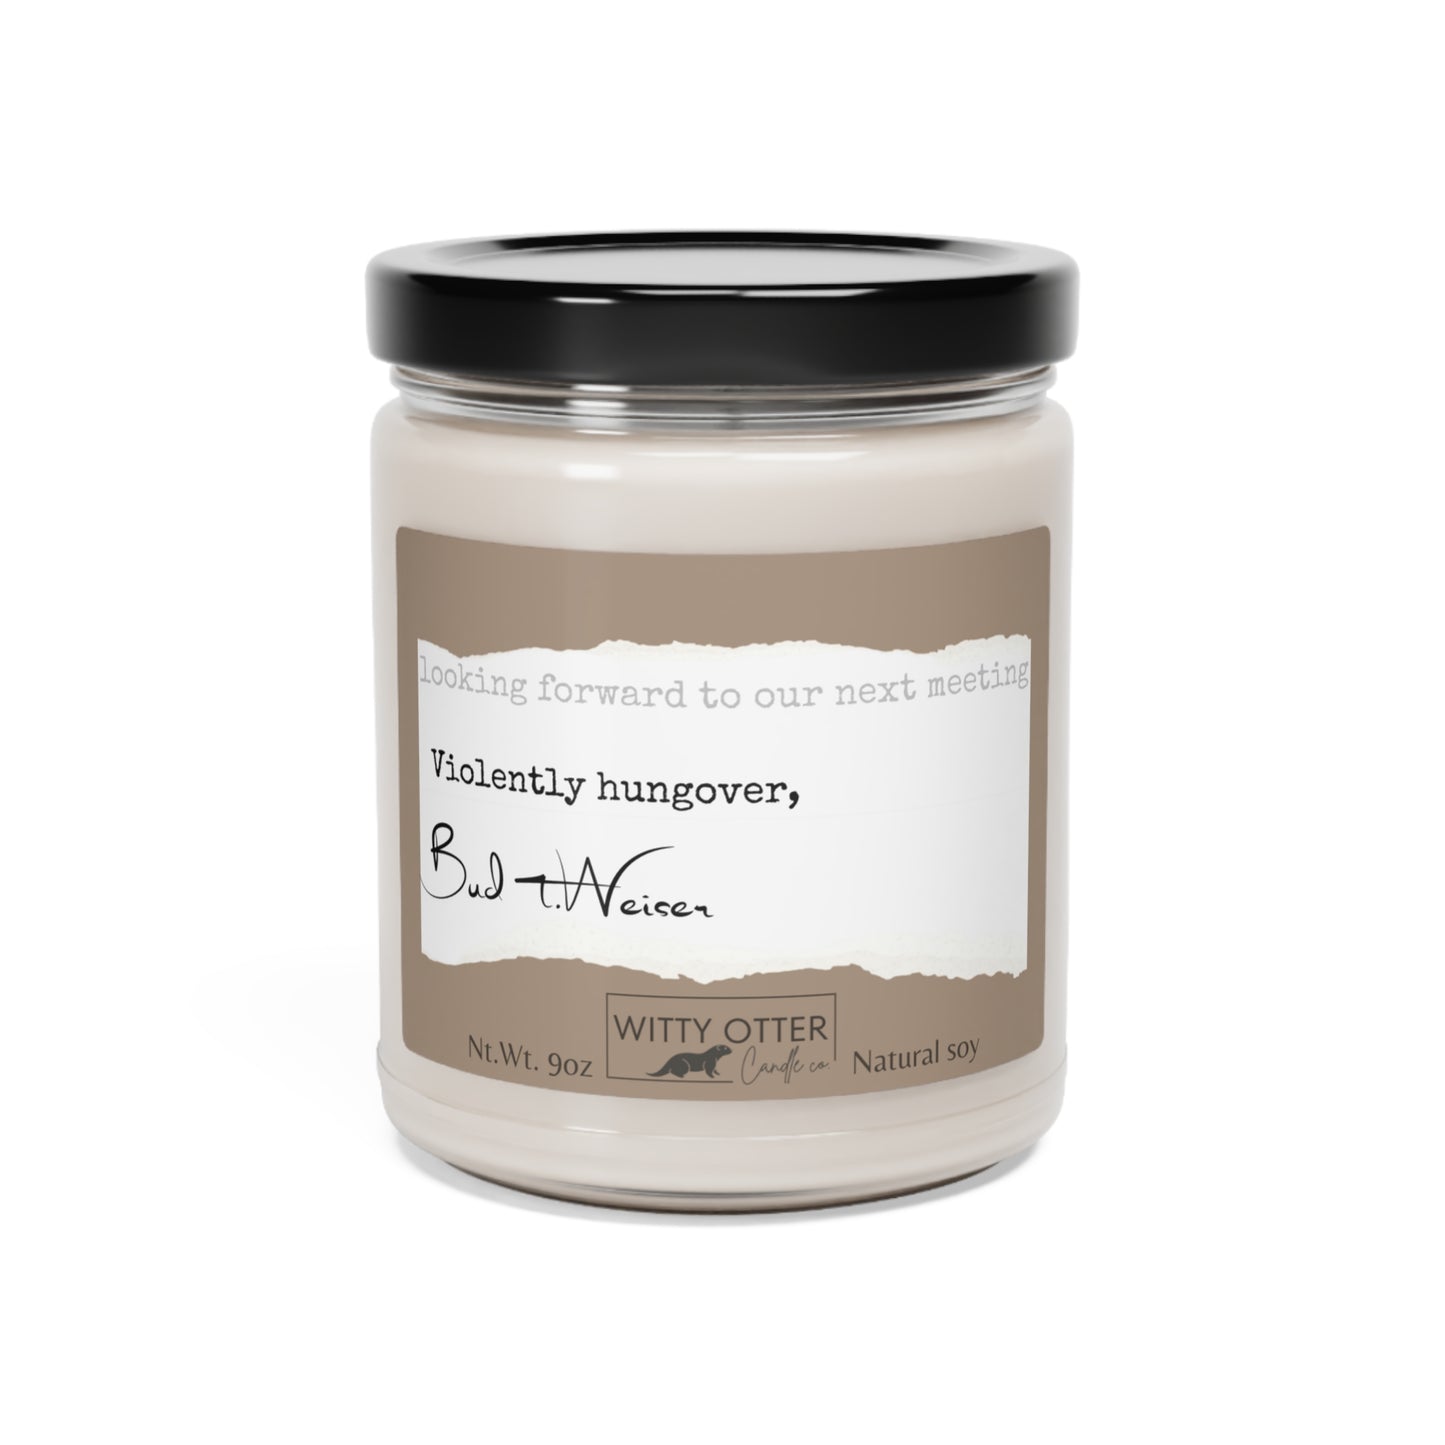 Hilarious office "signature" scented Soy Candle, 9oz - "Bud Weiser" signed candle